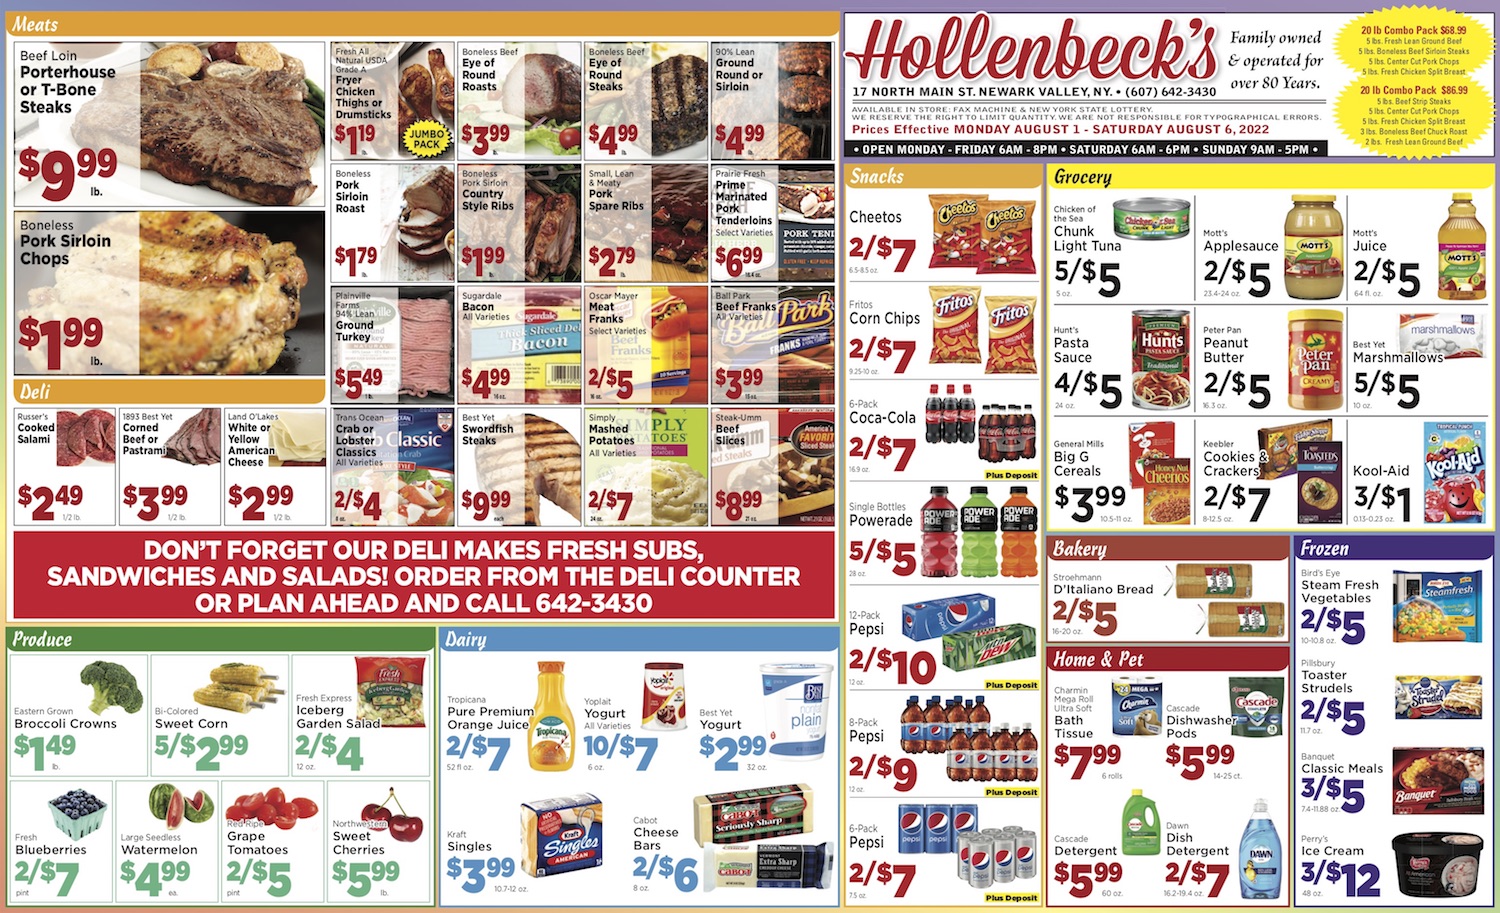 Hollenbeck's of Newark Valley; specials for August 1-6